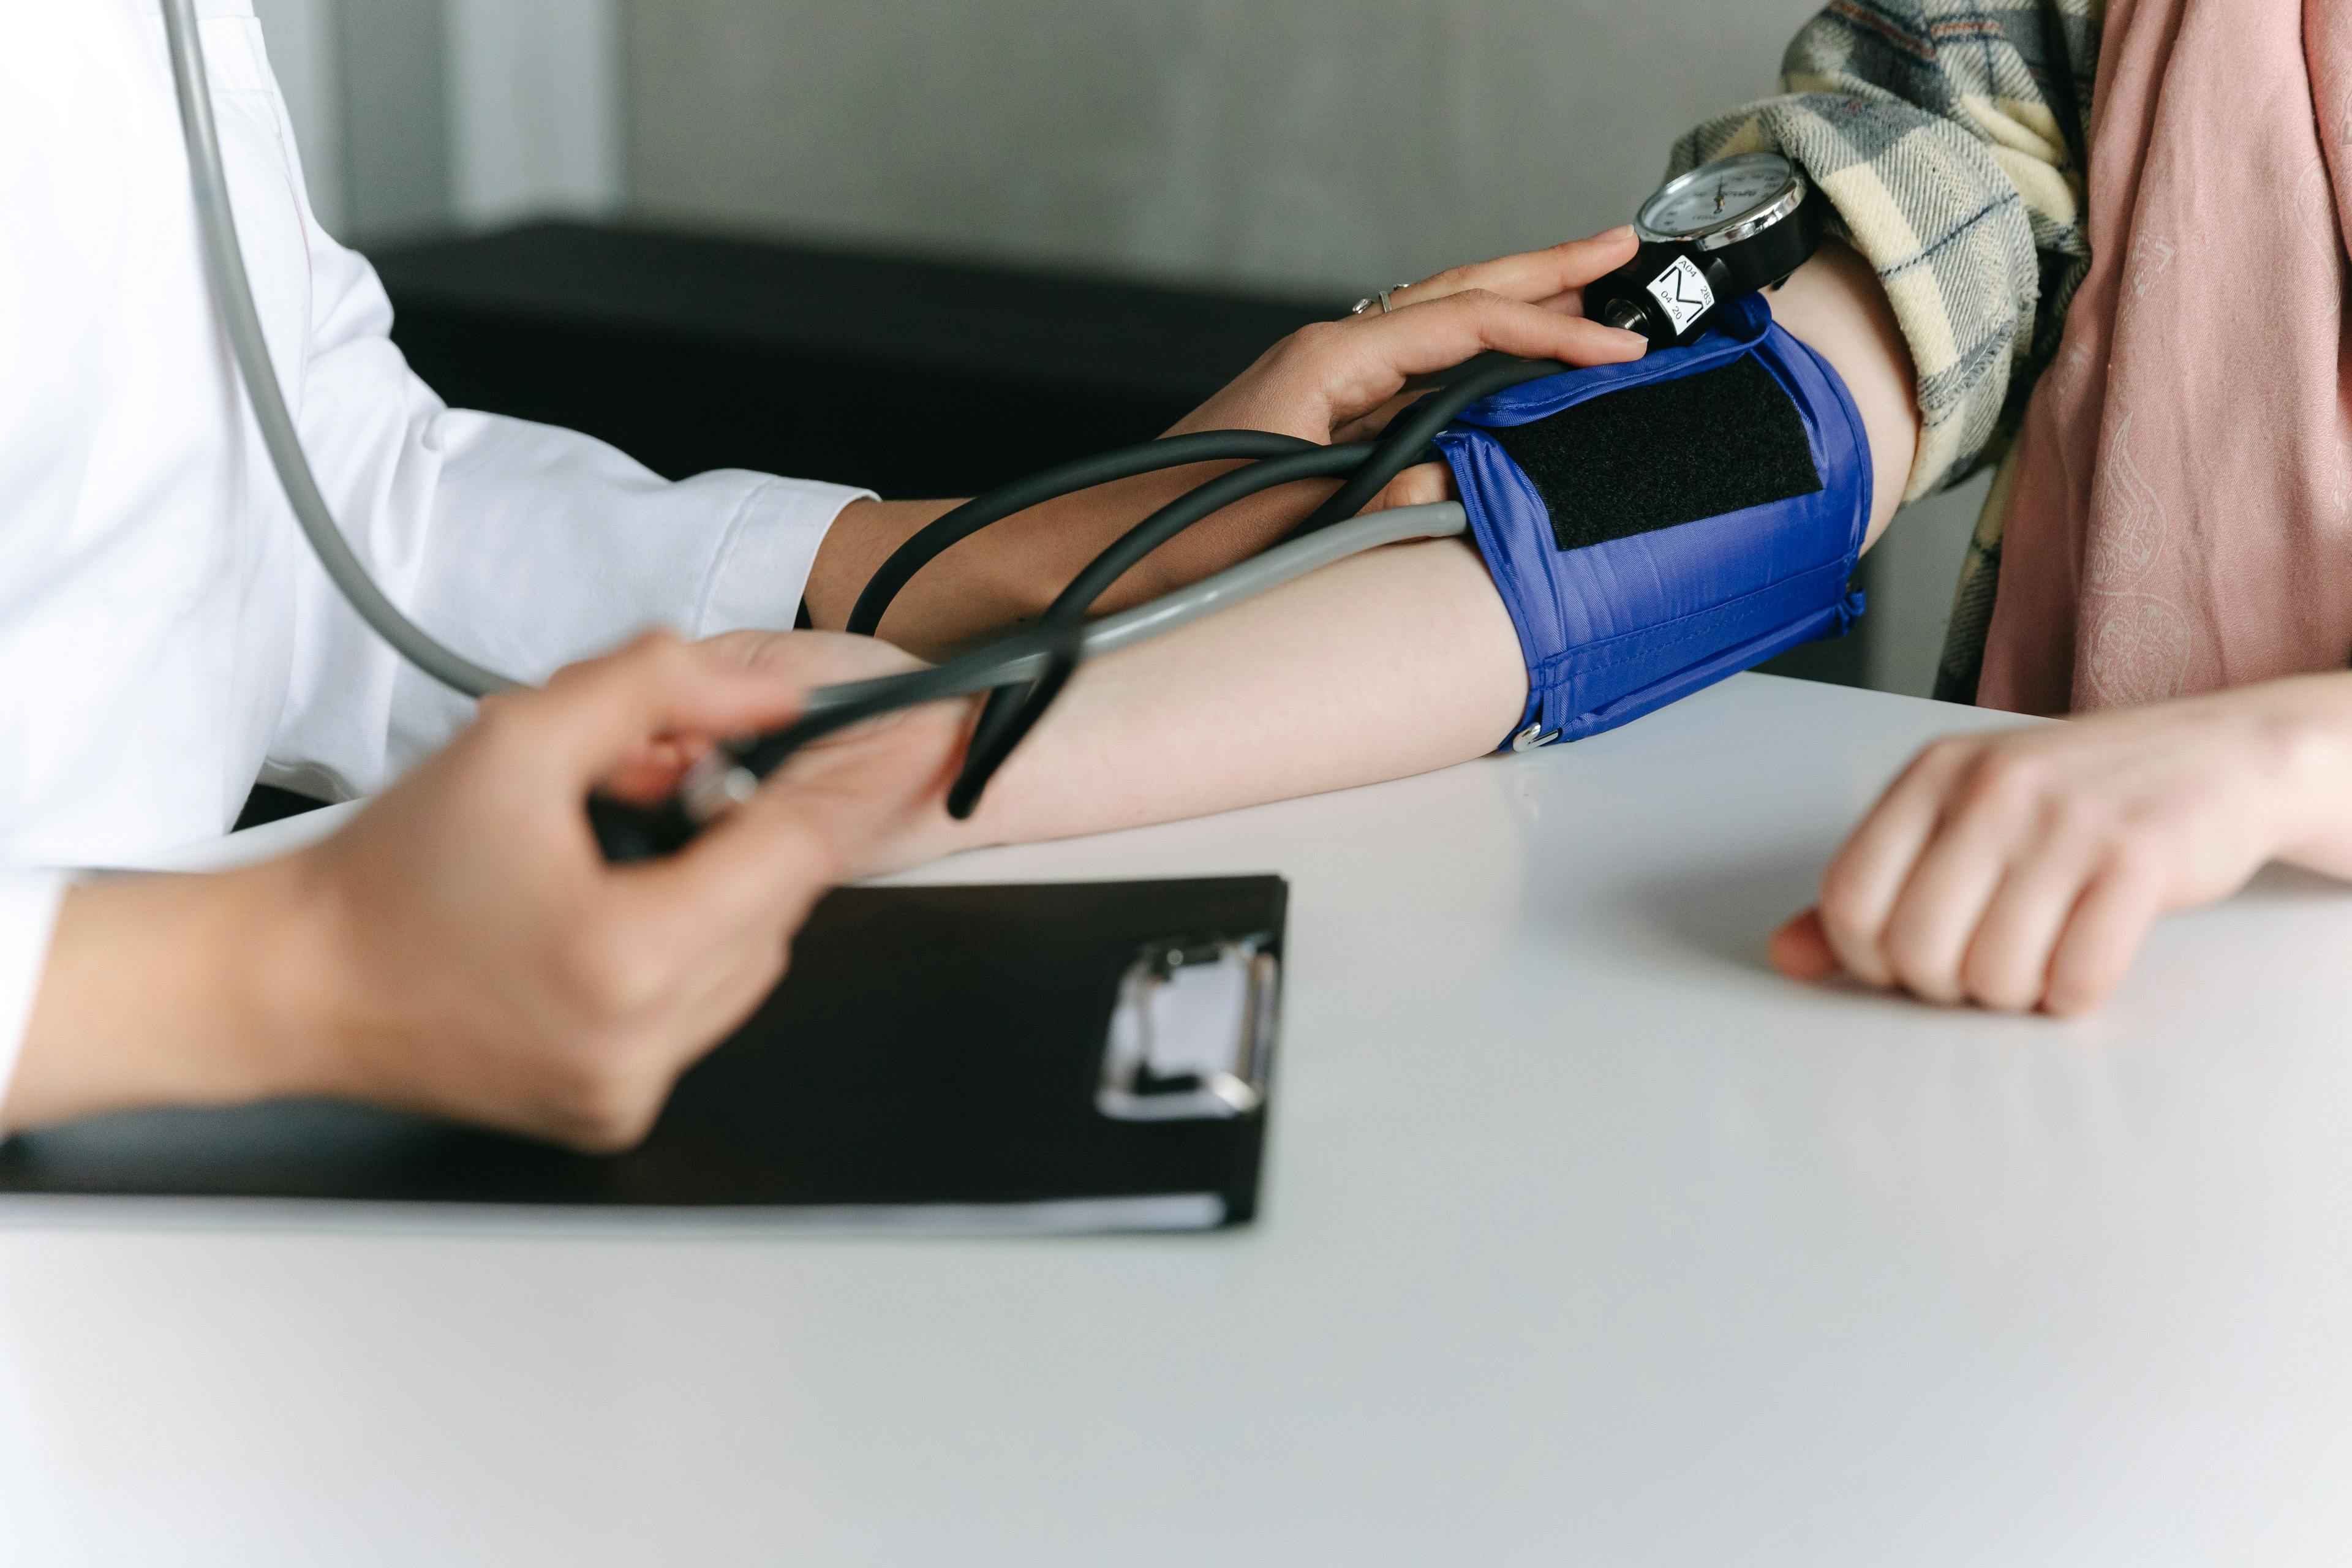 There’s no cure for high blood pressure, but healthy lifestyle changes, prescription medication, and daily monitoring can prevent it from getting worse. In this article, we discuss the causes of high blood pressure, highlight some of its risks, and make suggestions to prevent potentially severe complications.